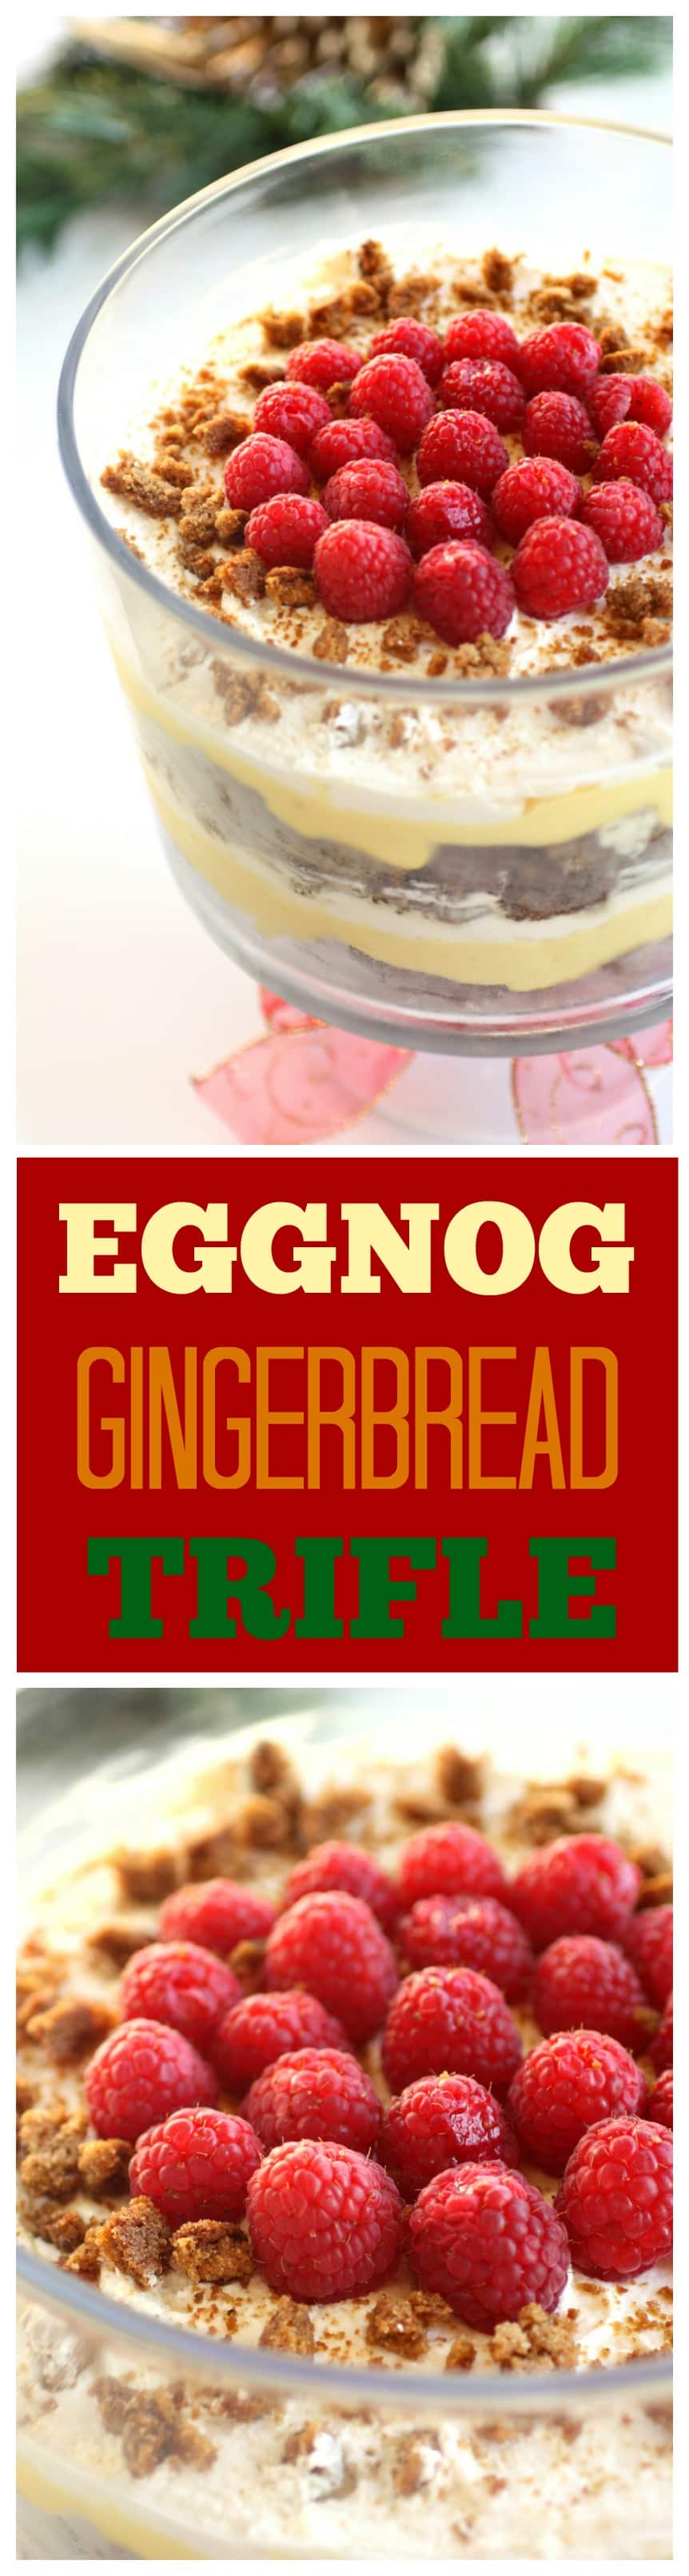 Eggnog Gingerbread Trifle - layers of gingerbread, eggnog pudding and whipped cream. So good!#eggnog #gingerbread #trifle #christmas #dessert #recipe